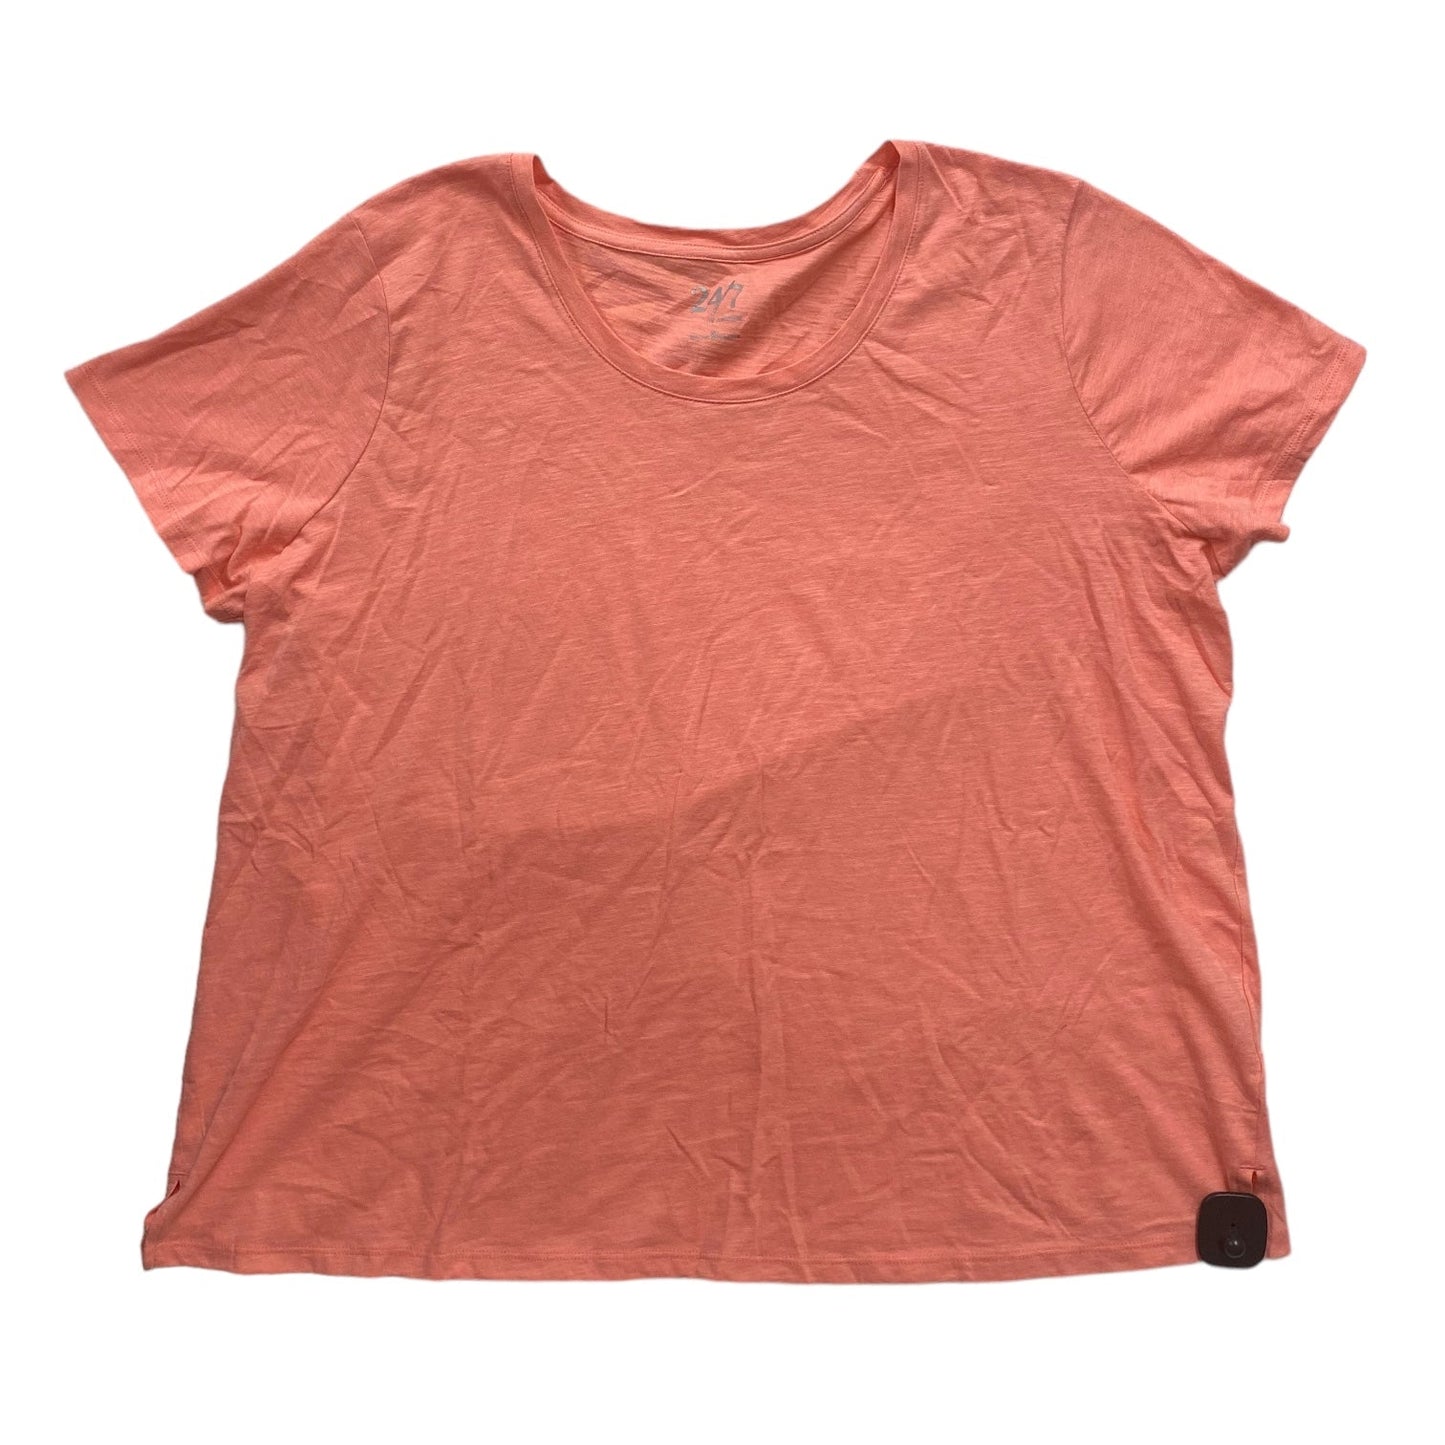 Pink Top Short Sleeve Maurices, Size 2x